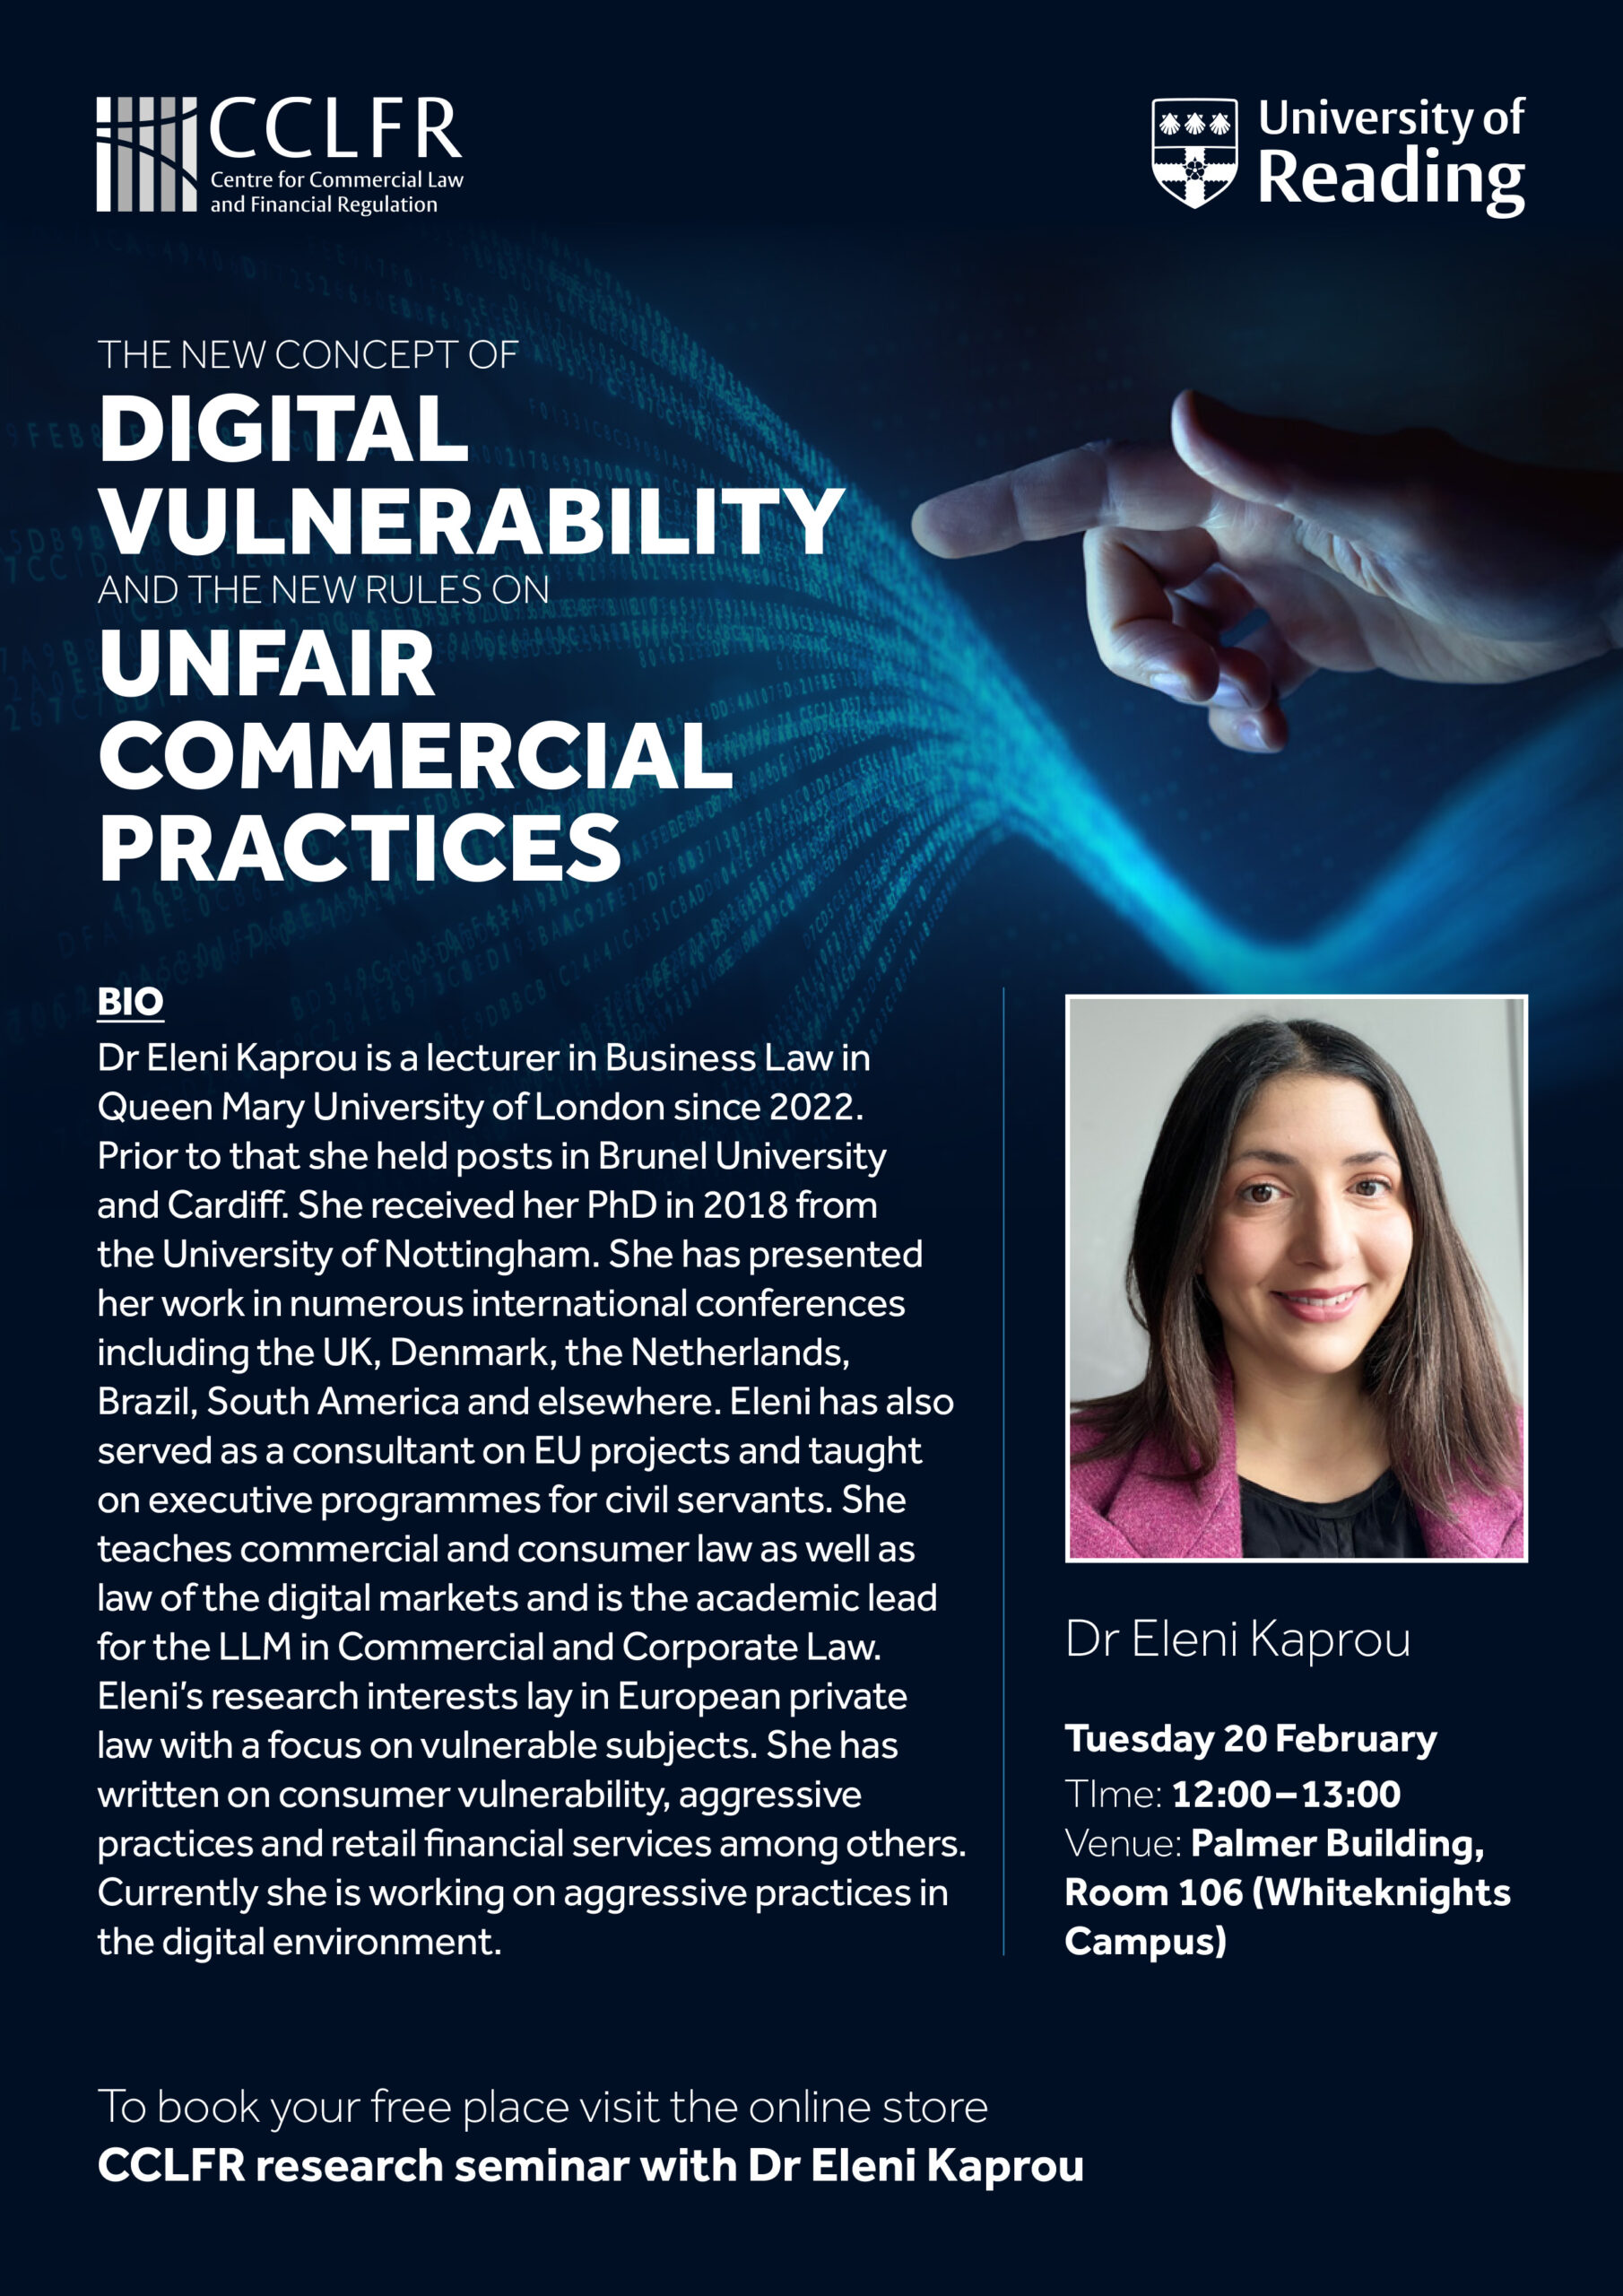 The New Concept of Digital Vulnerability And The New Rules On Unfair Commercial Practices